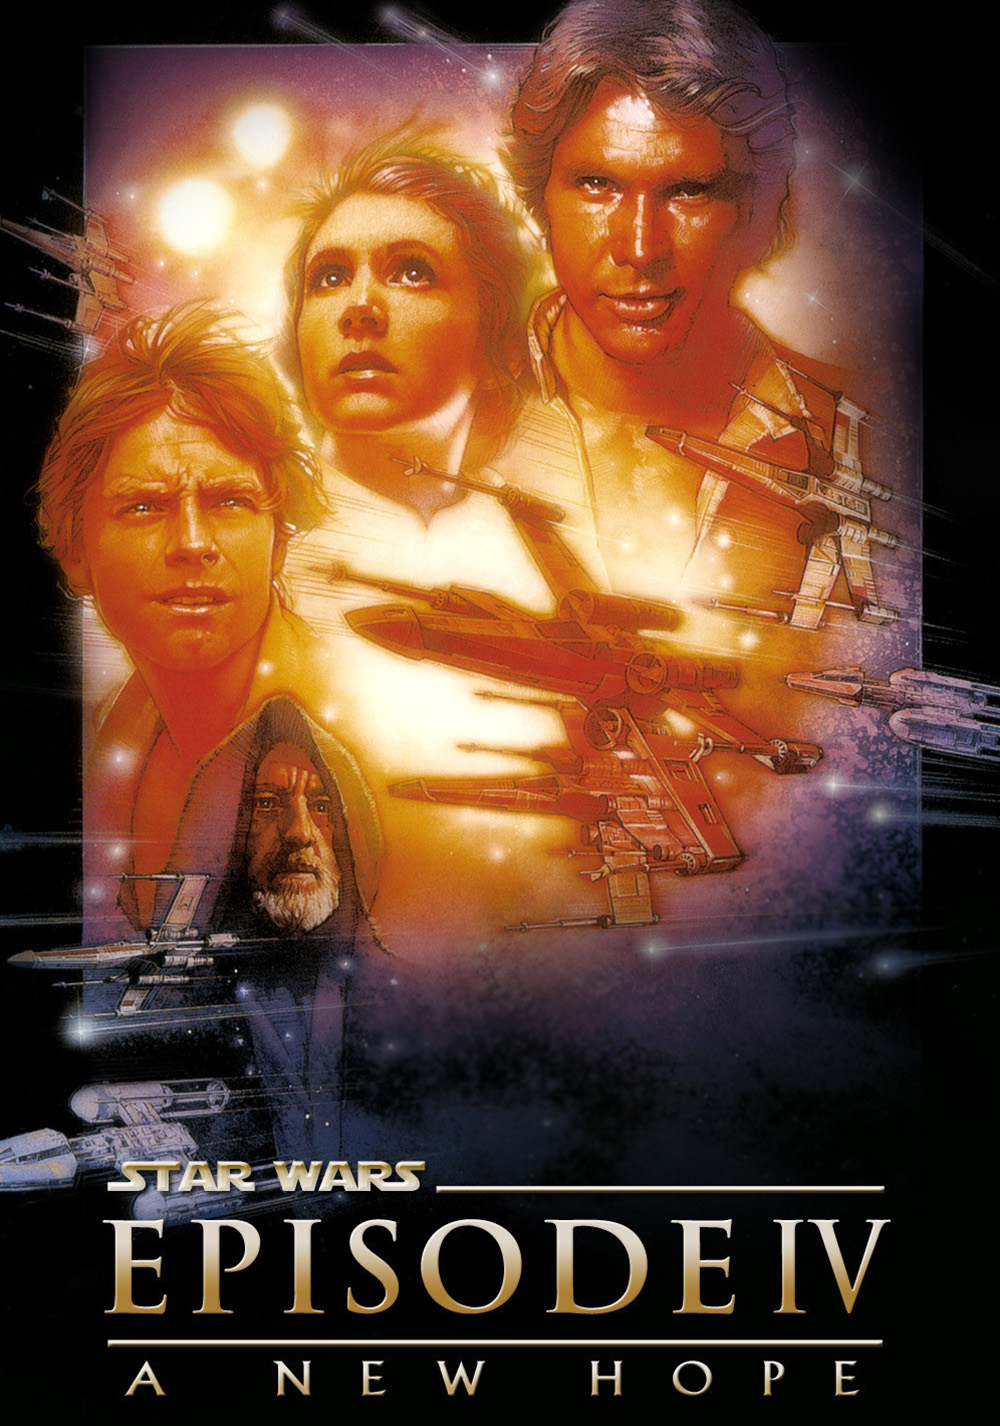 Star Wars A New Hope Poster Star Wars Episode Iv A New Hope Movie Poster The Art Of Images